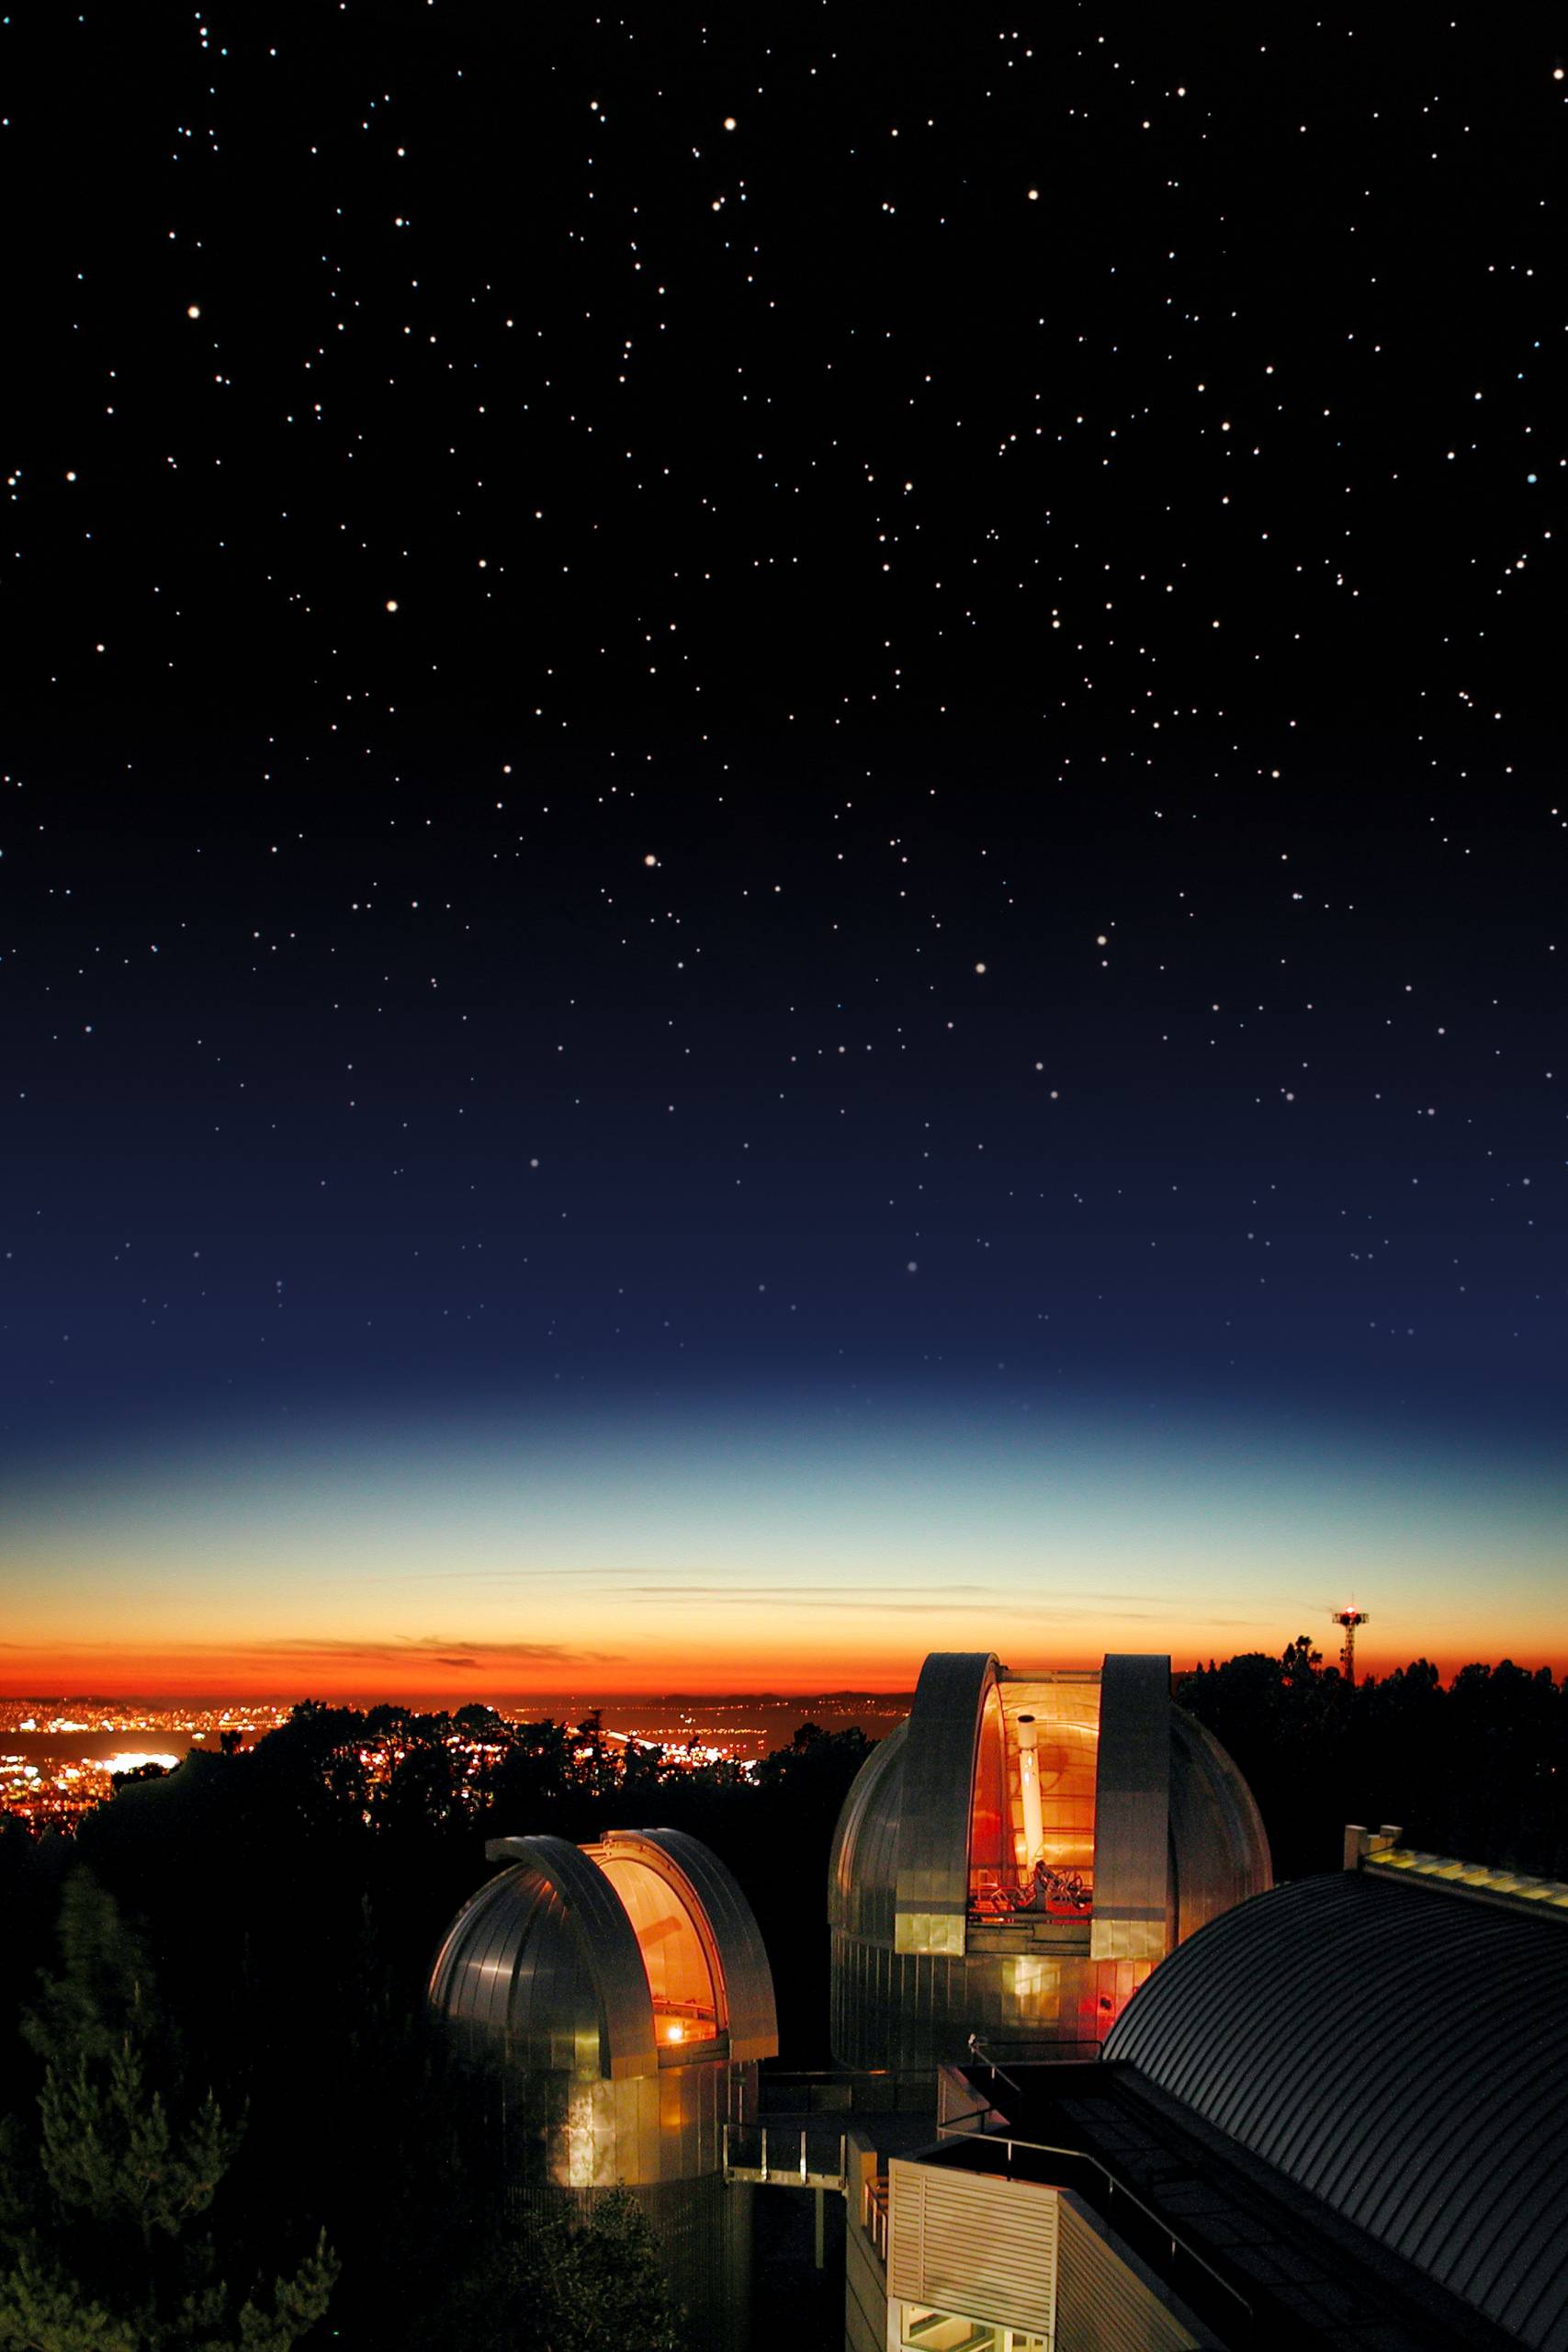 Bright dots scattered across the night sky, blue, orange and red sunset and a glowing orange round buildings. 